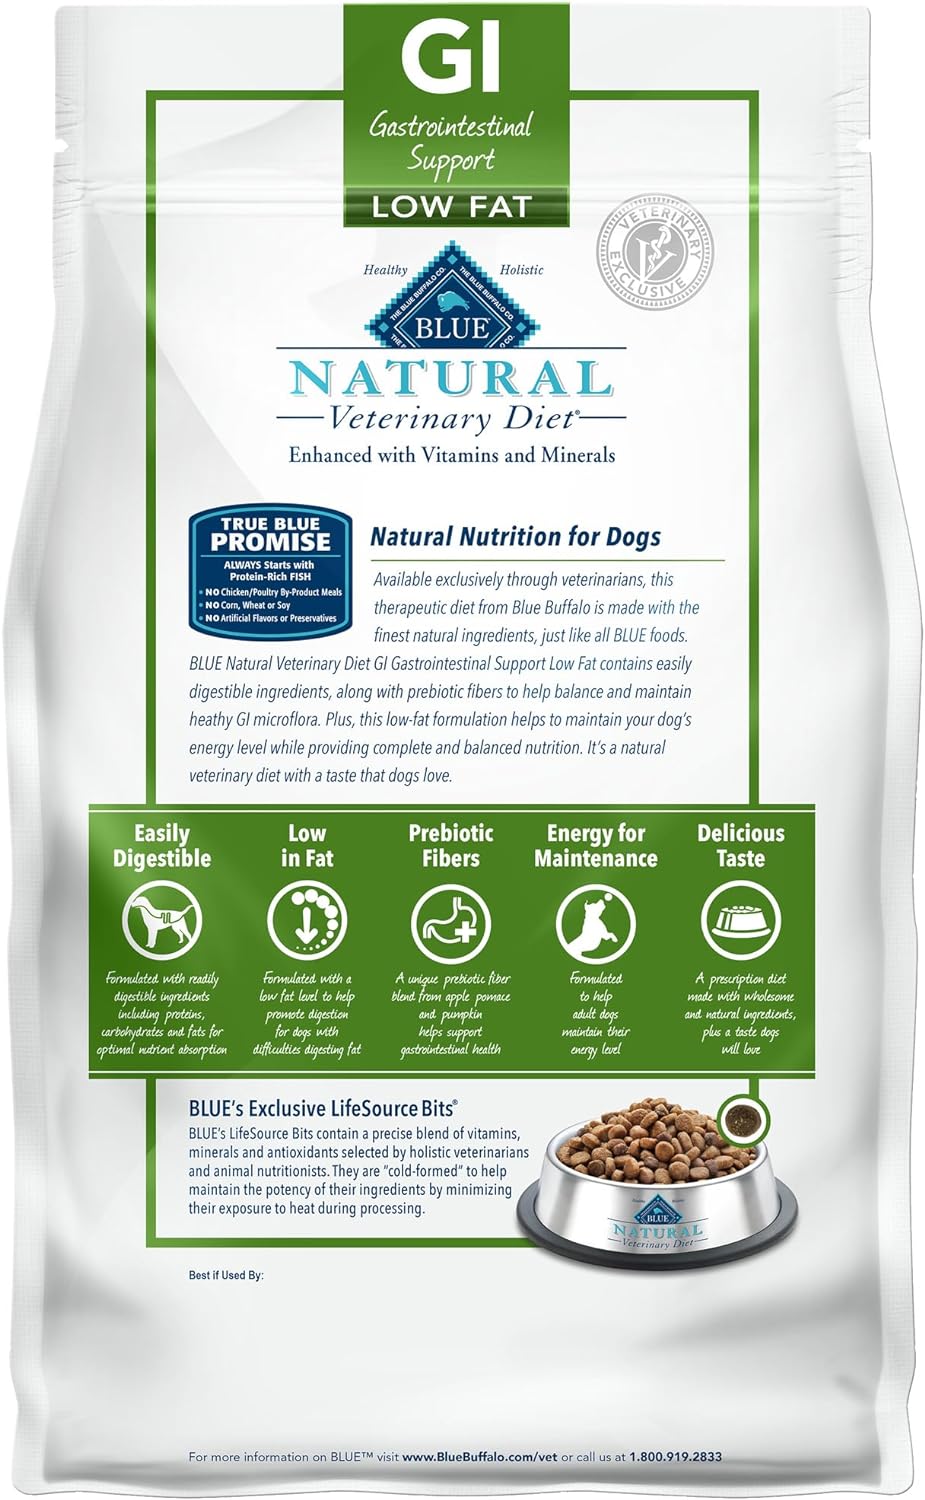 Blue Natural Veterinary Diet GI Gastrointestinal Support Low Fat Dry Dog Food – Gallery Image 8